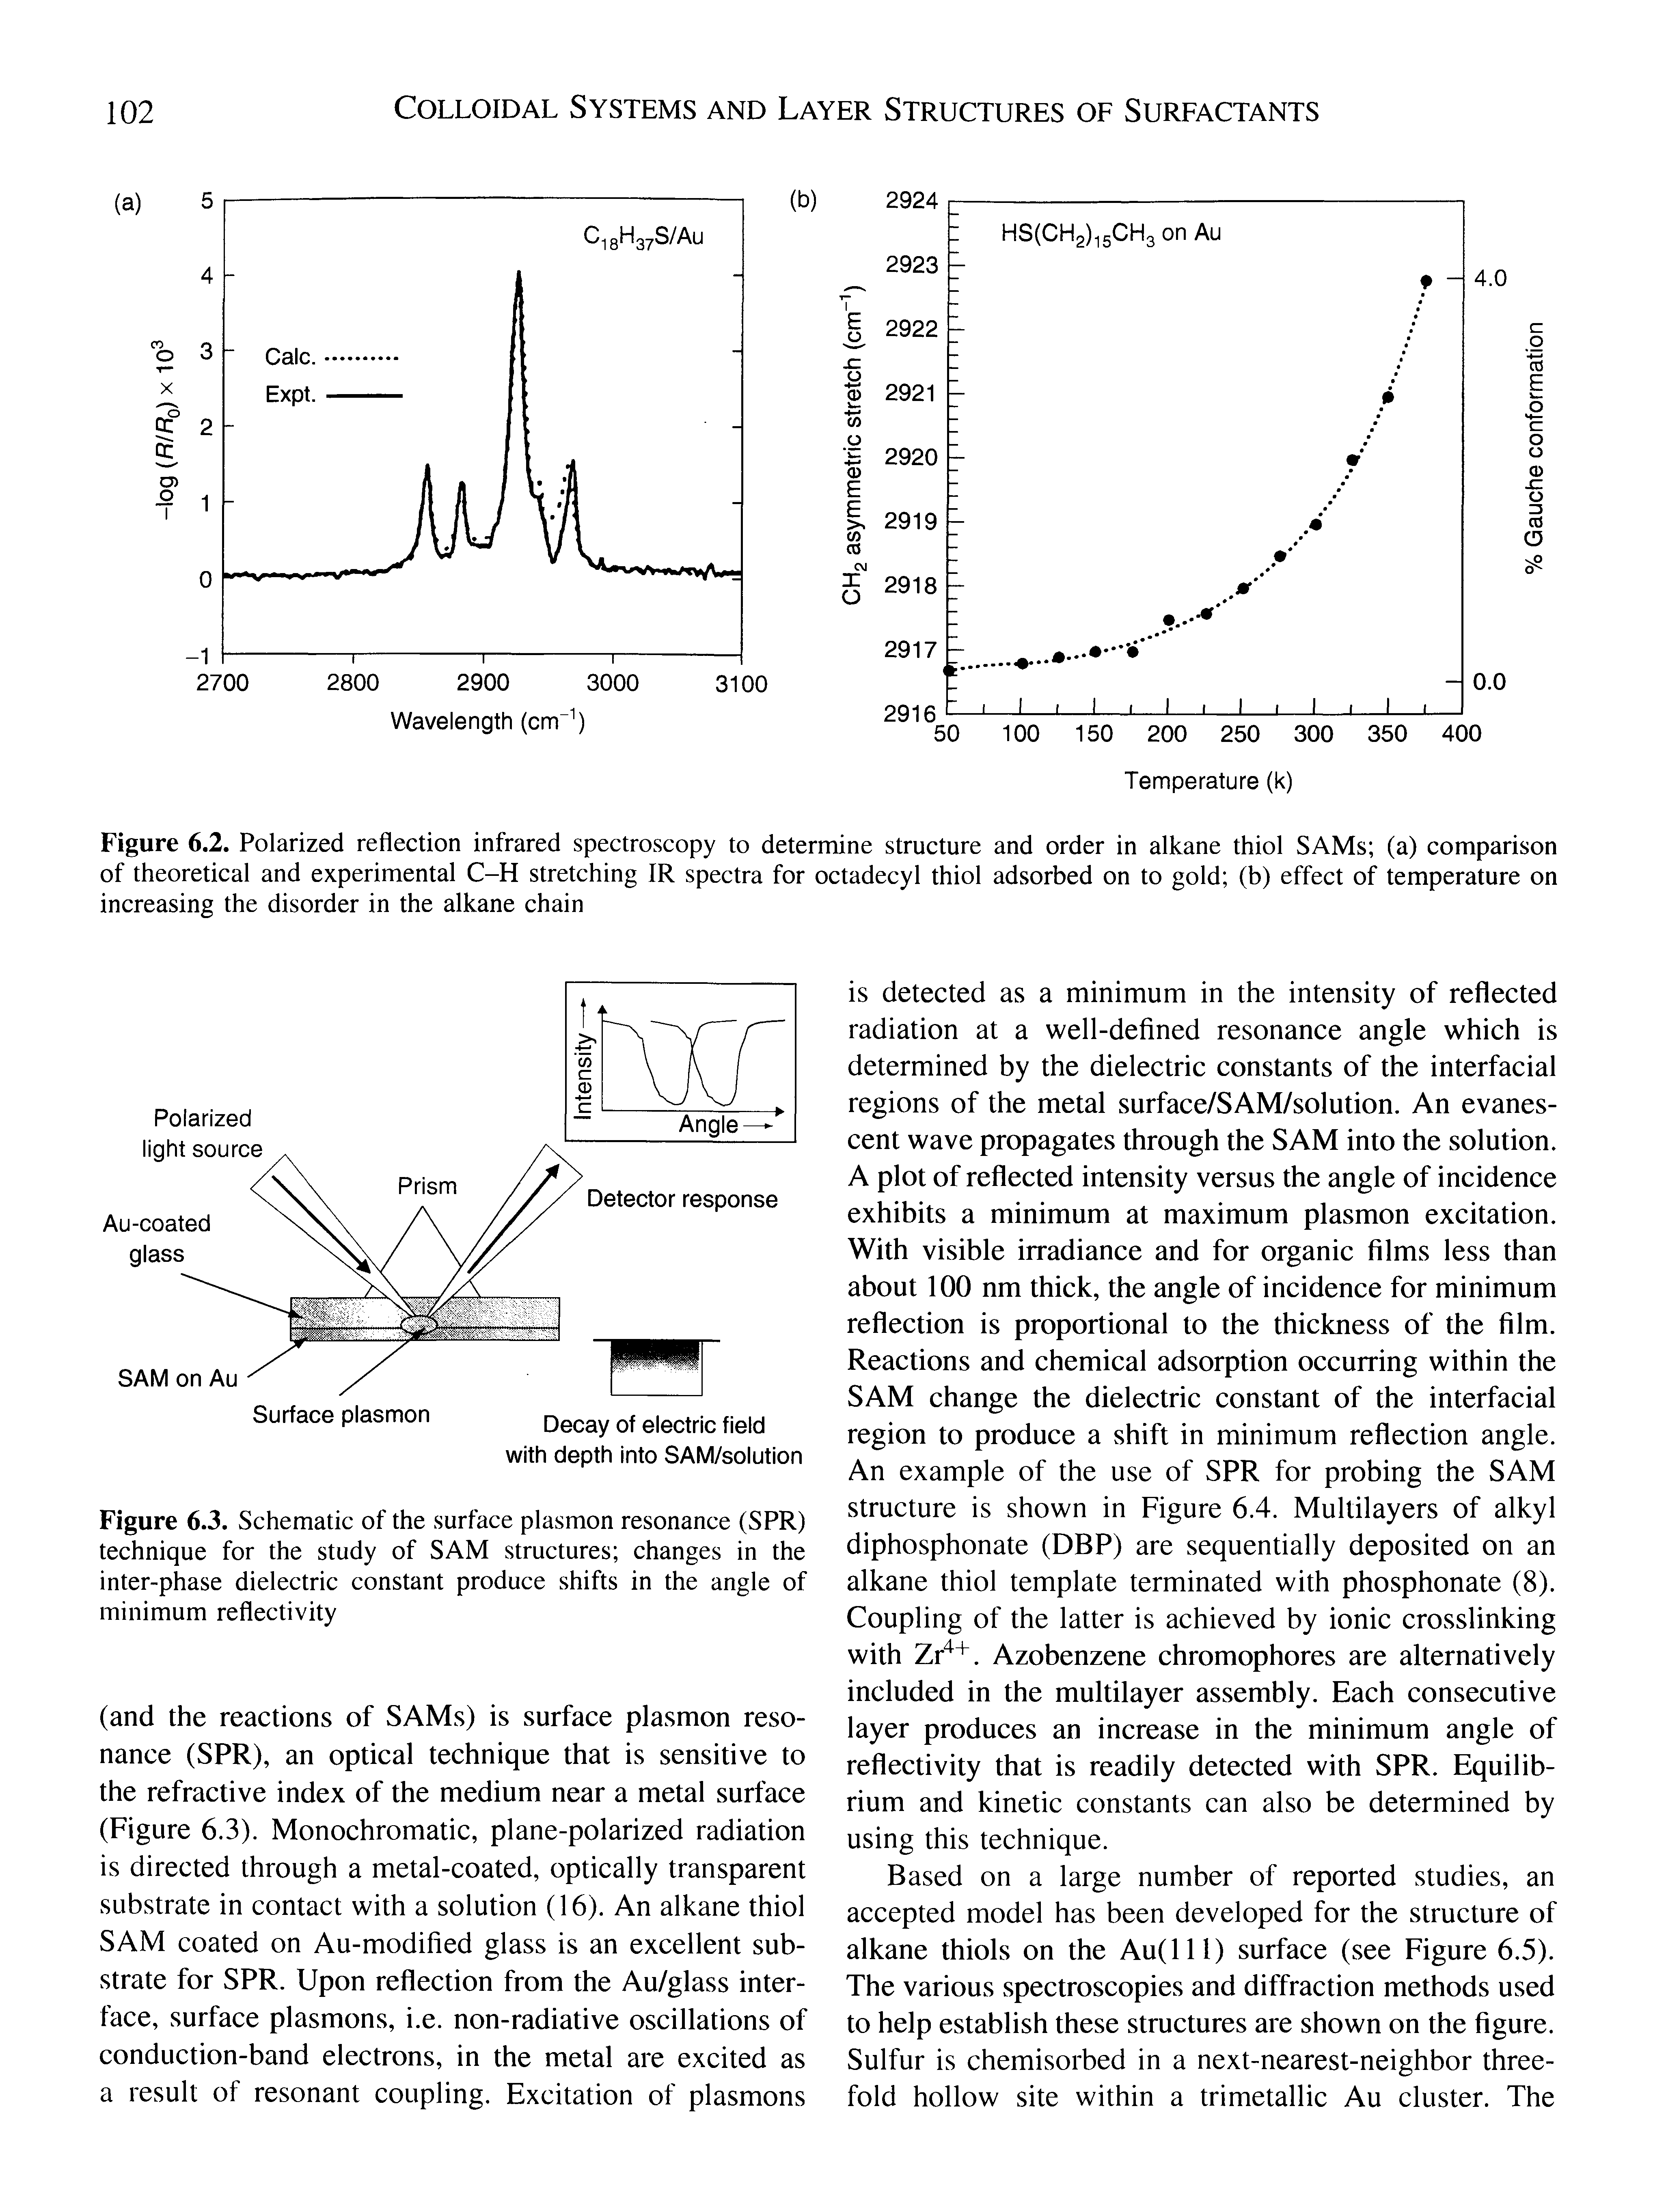 Figure 6.3. Schematic of the surface plasmon resonance (SPR) technique for the study of SAM structures changes in the inter-phase dielectric constant produce shifts in the angle of minimum reflectivity...